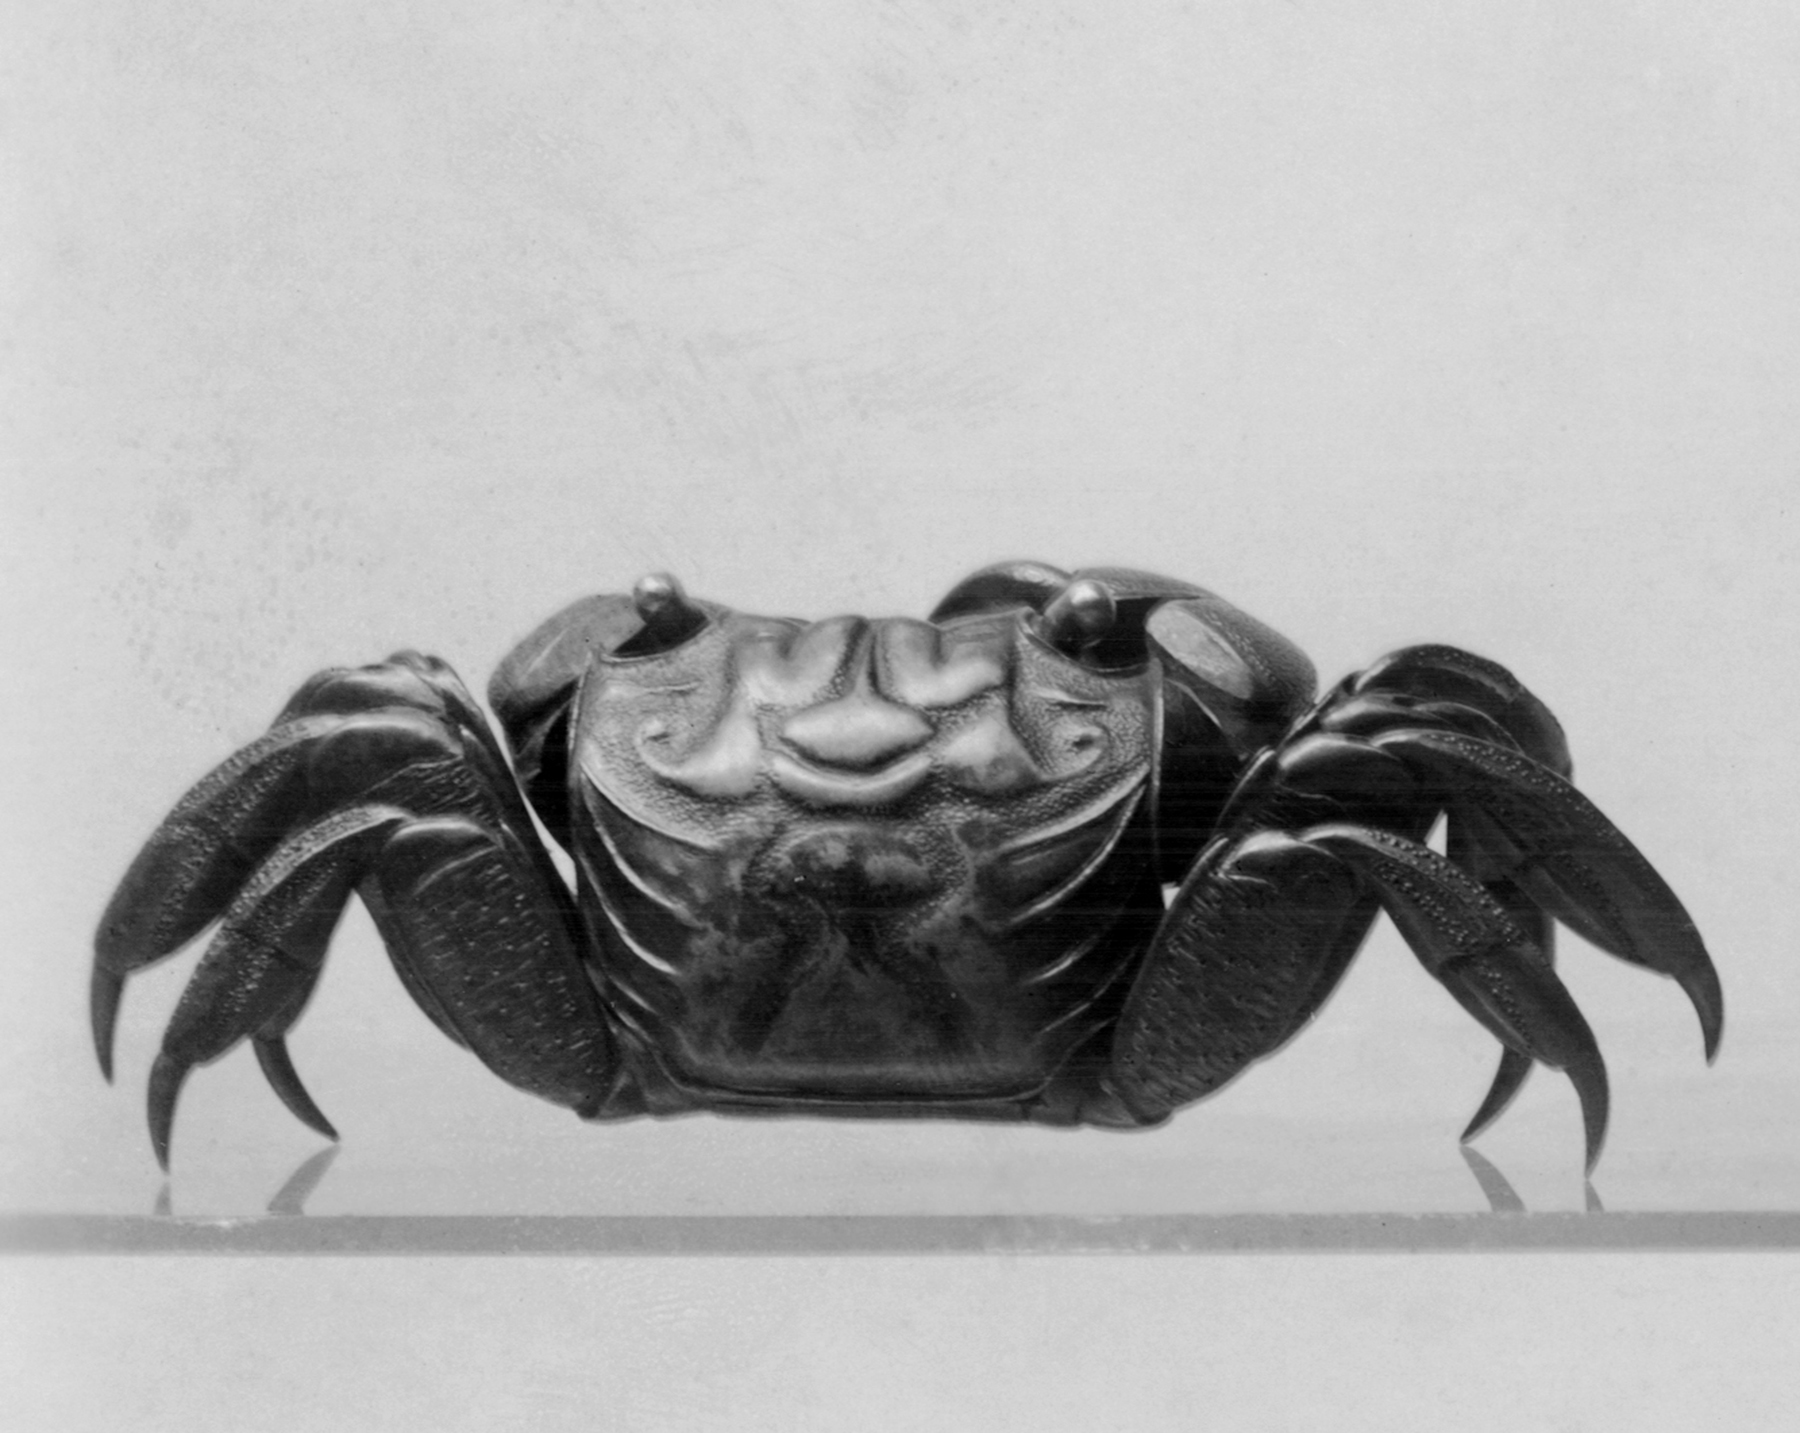 Image for Crab Box